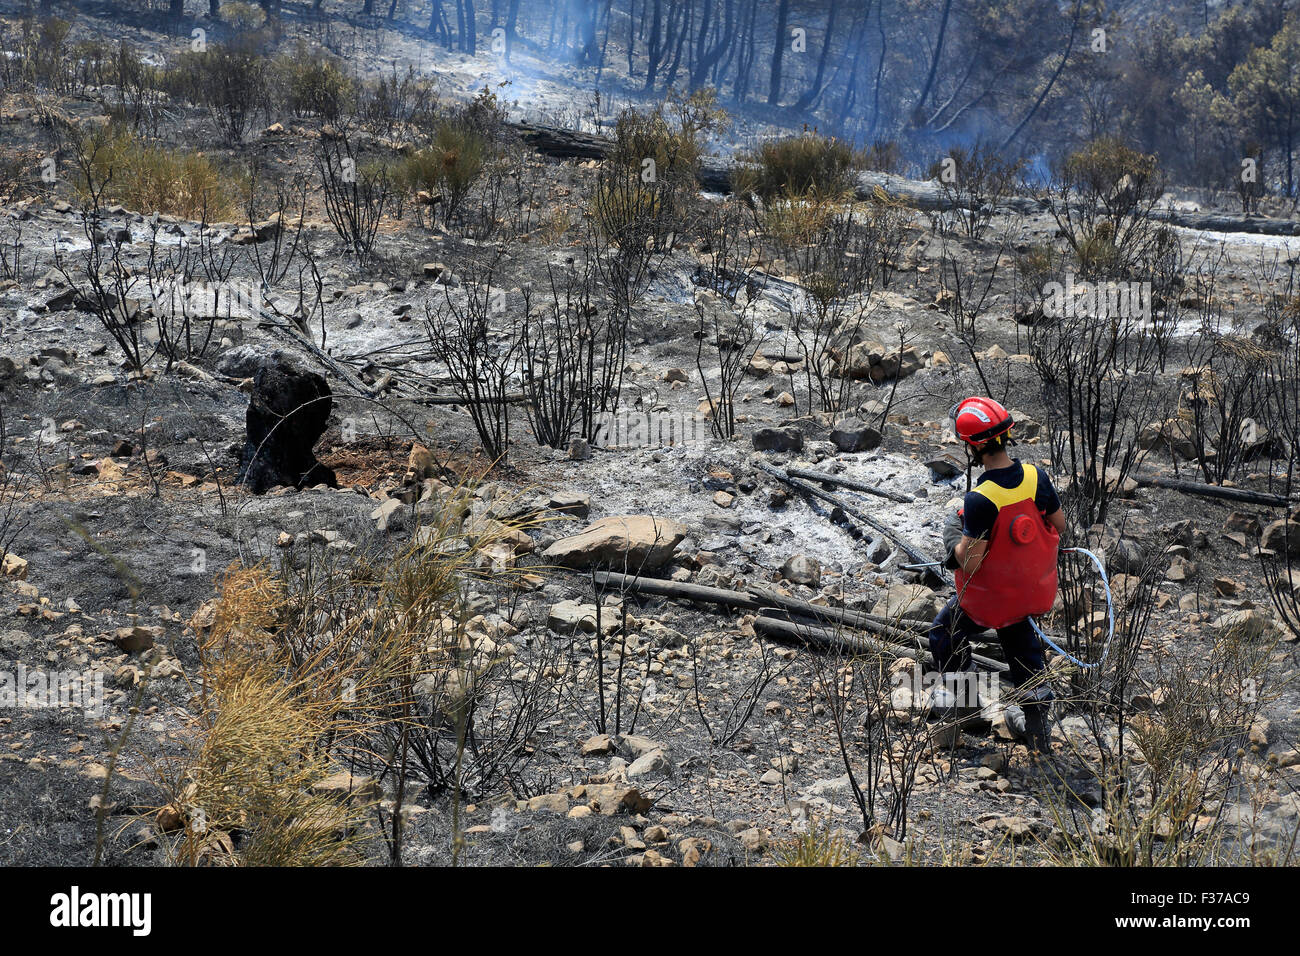 Firefighter, fighting fire, forest fires in Castellar, Maritime Alps, Provence-Alpes-Côte d'Azur, France, Stock Photo